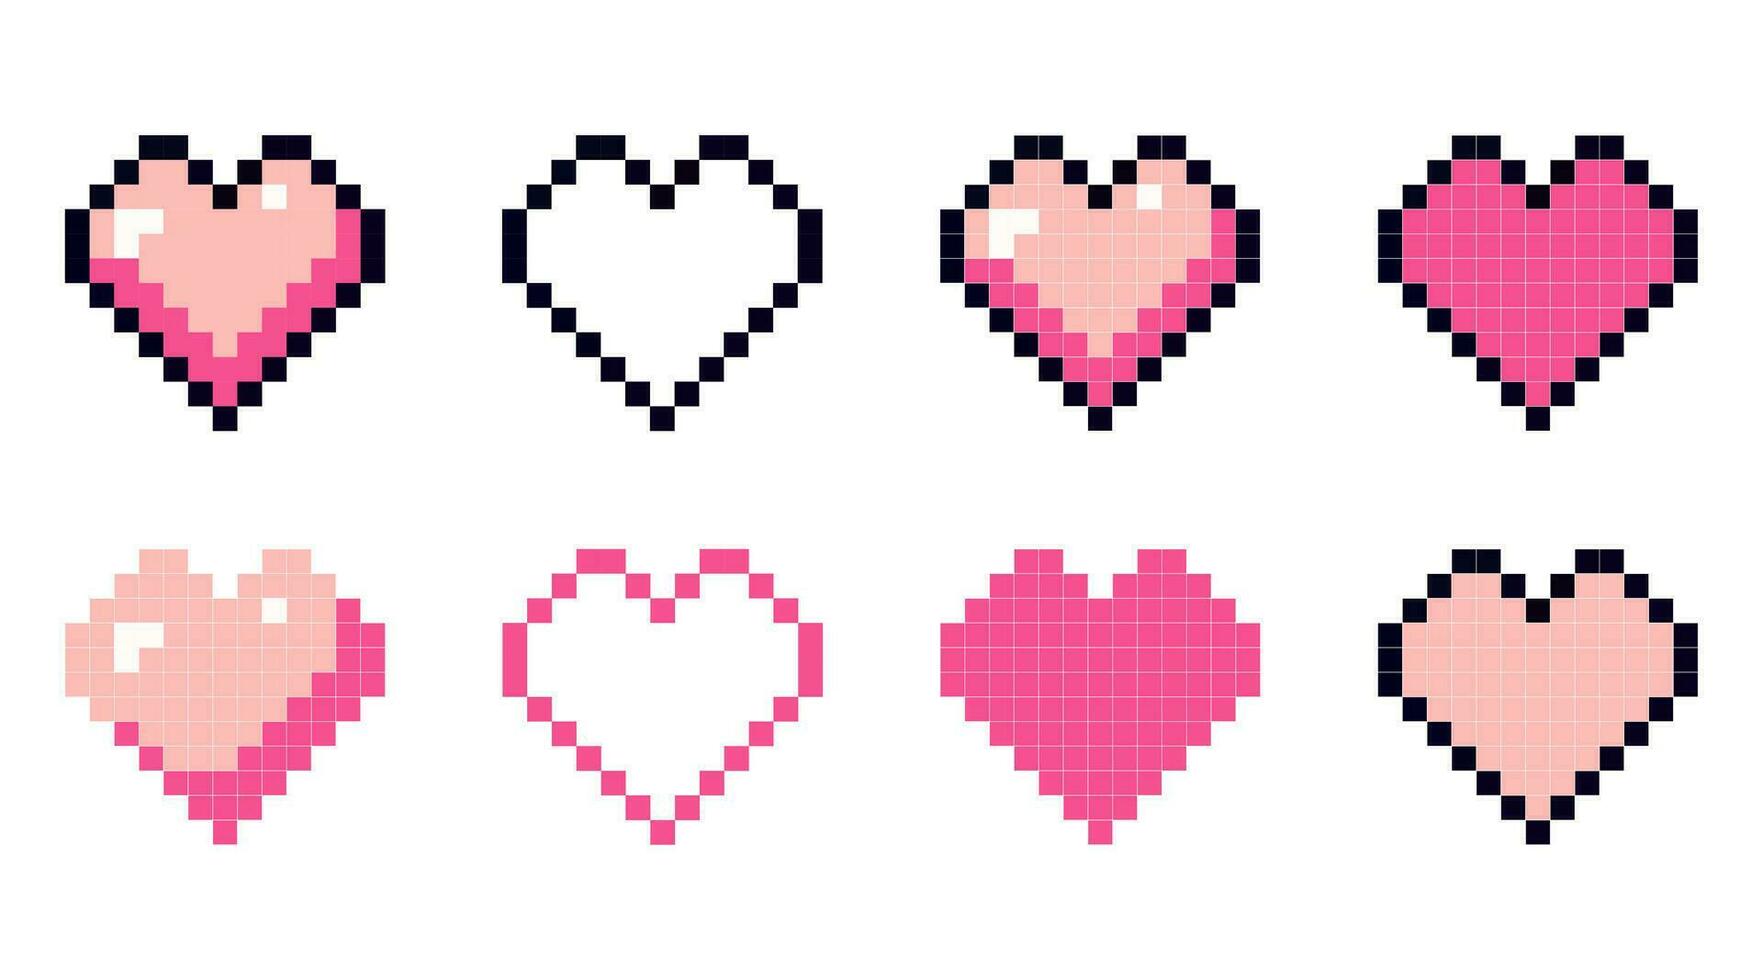 Set of different pink hearts in pixel art style. Pixel icon, vector illustration isolated on white background. Vector 8-bit retro style illustration